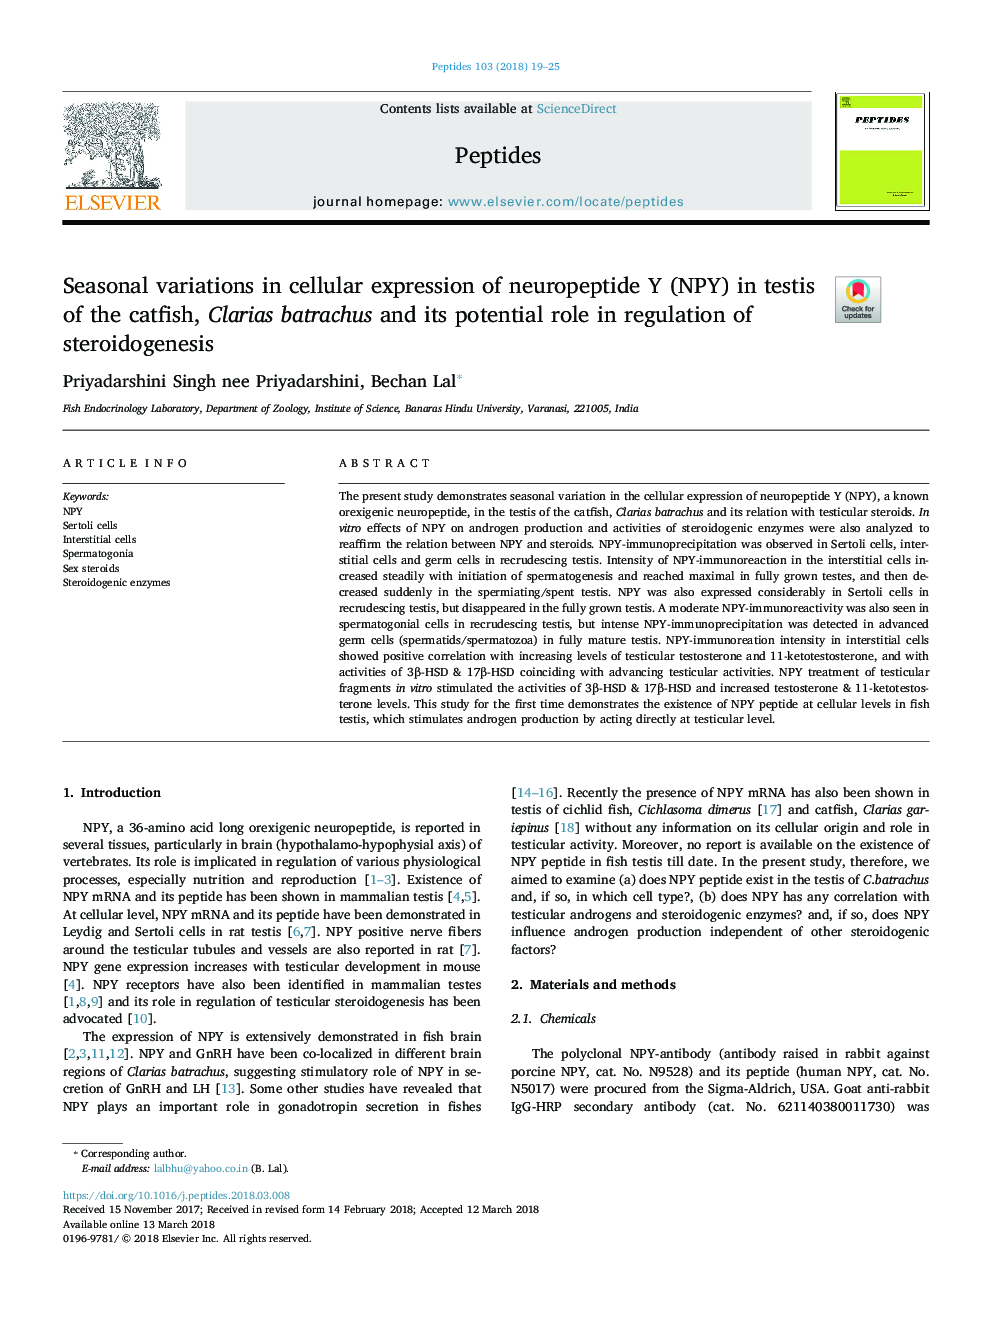 Seasonal variations in cellular expression of neuropeptide Y (NPY) in testis of the catfish, Clarias batrachus and its potential role in regulation of steroidogenesis